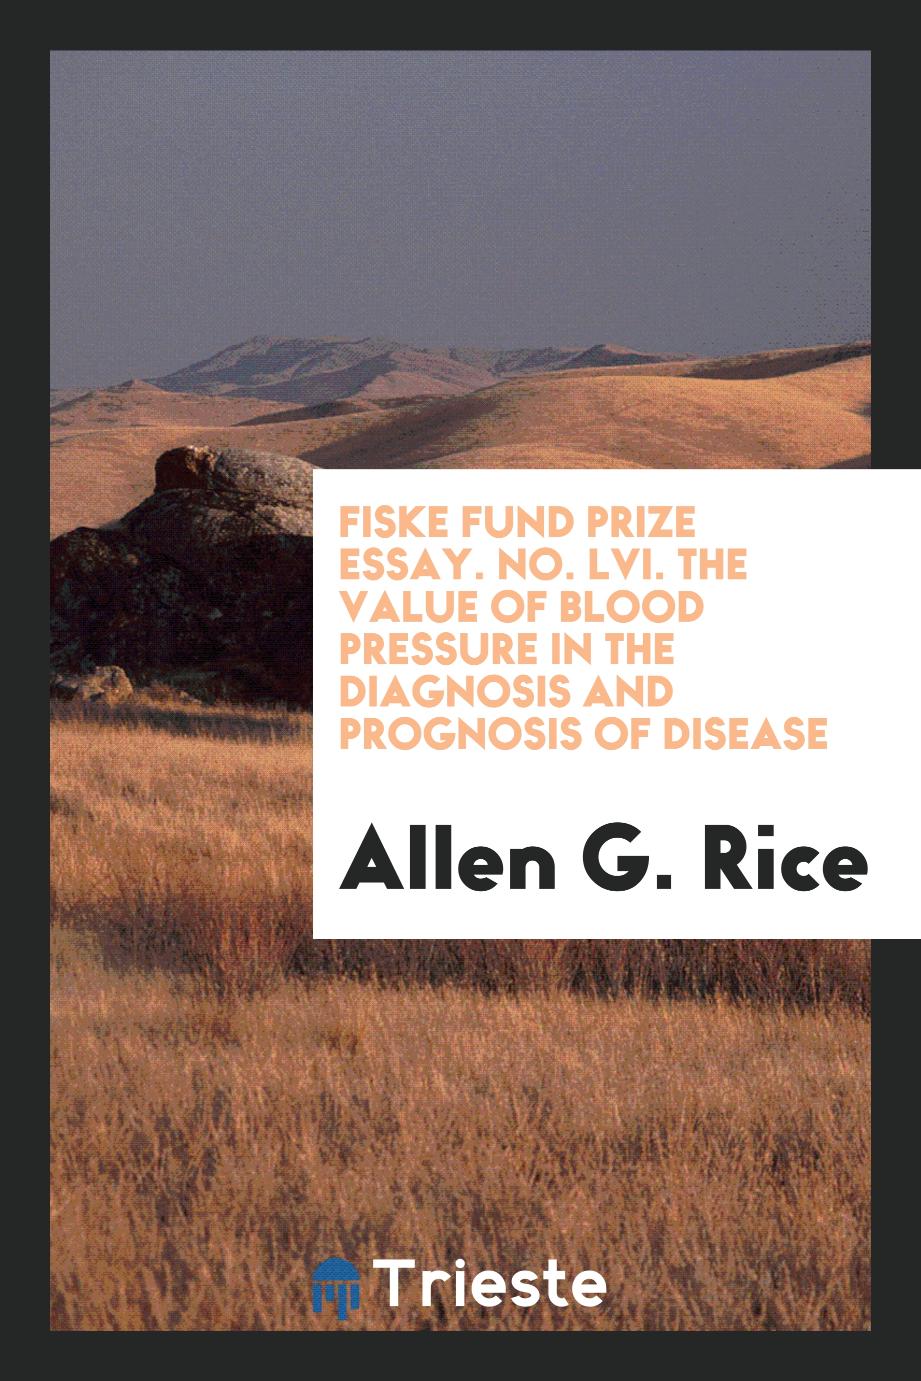 Fiske Fund prize essay. No. LVI. The Value of Blood Pressure in the Diagnosis and Prognosis of Disease